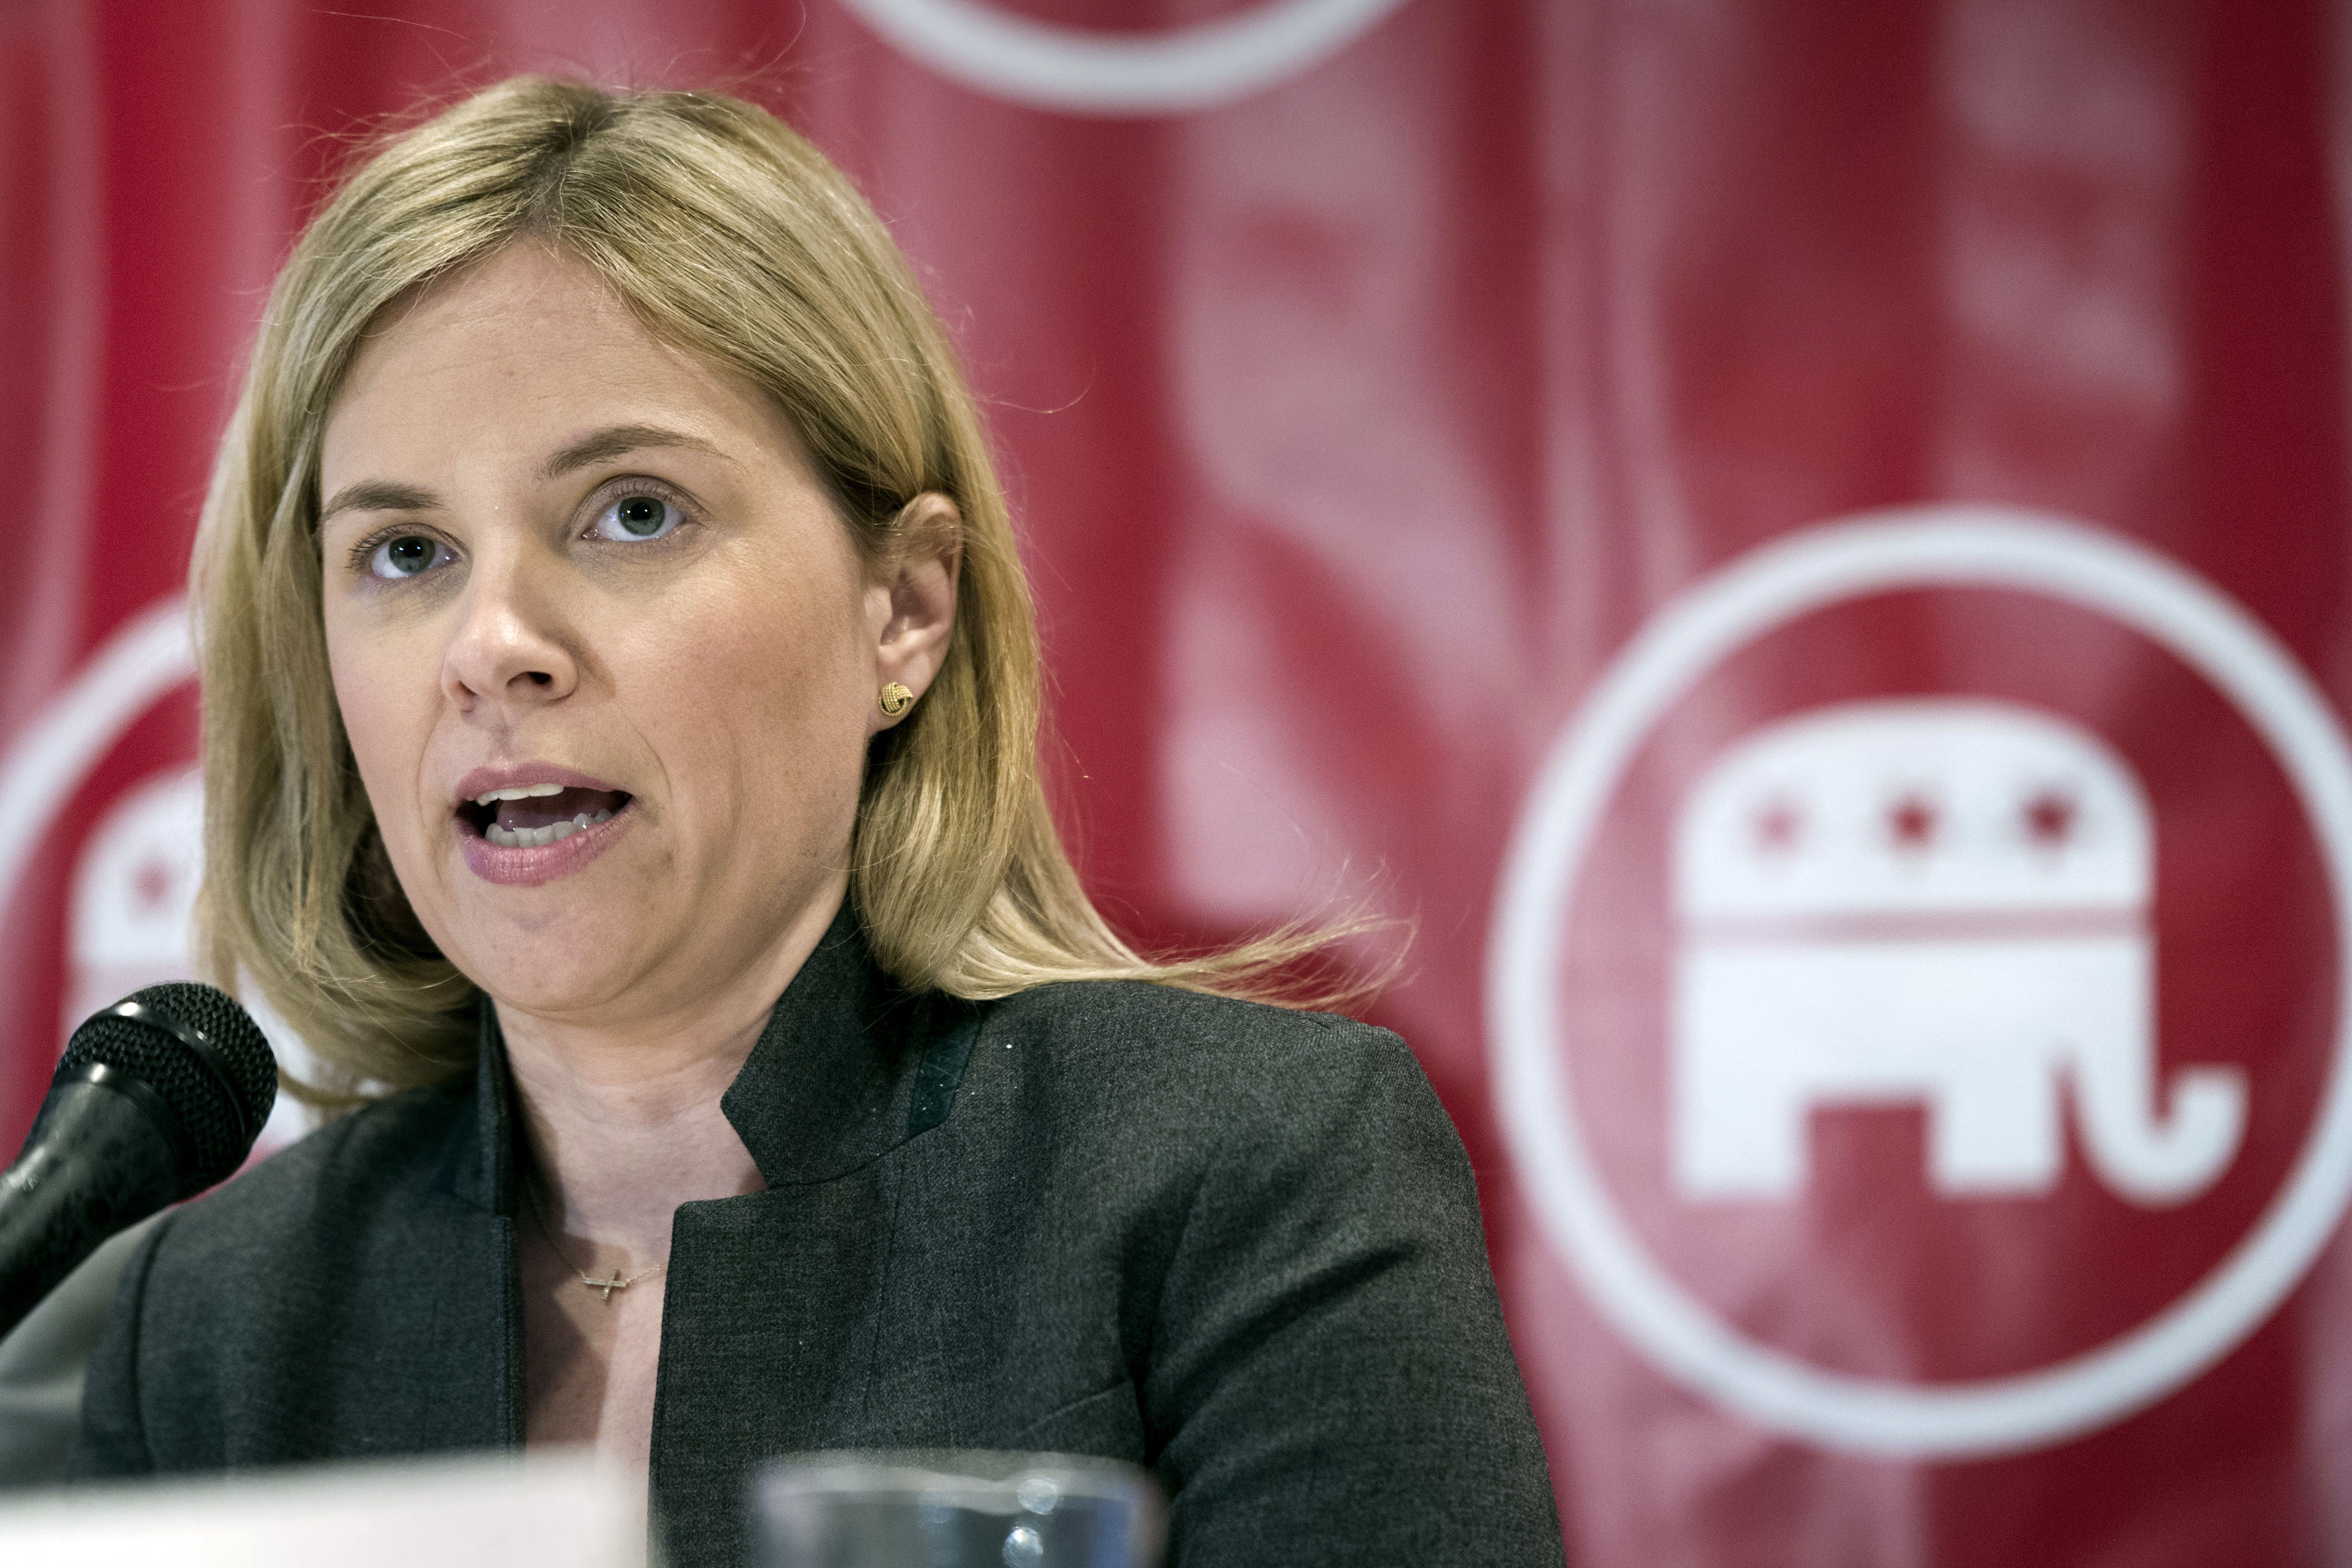 Republican National Committee (RNC) Chief of Staff Katie Walsh appears at a post-election press briefing to discuss the RNC's role in the election, at the Capitol Hill Club in Washington, Monday, Nov. 14, 2016. (Cliff Owen—AP)